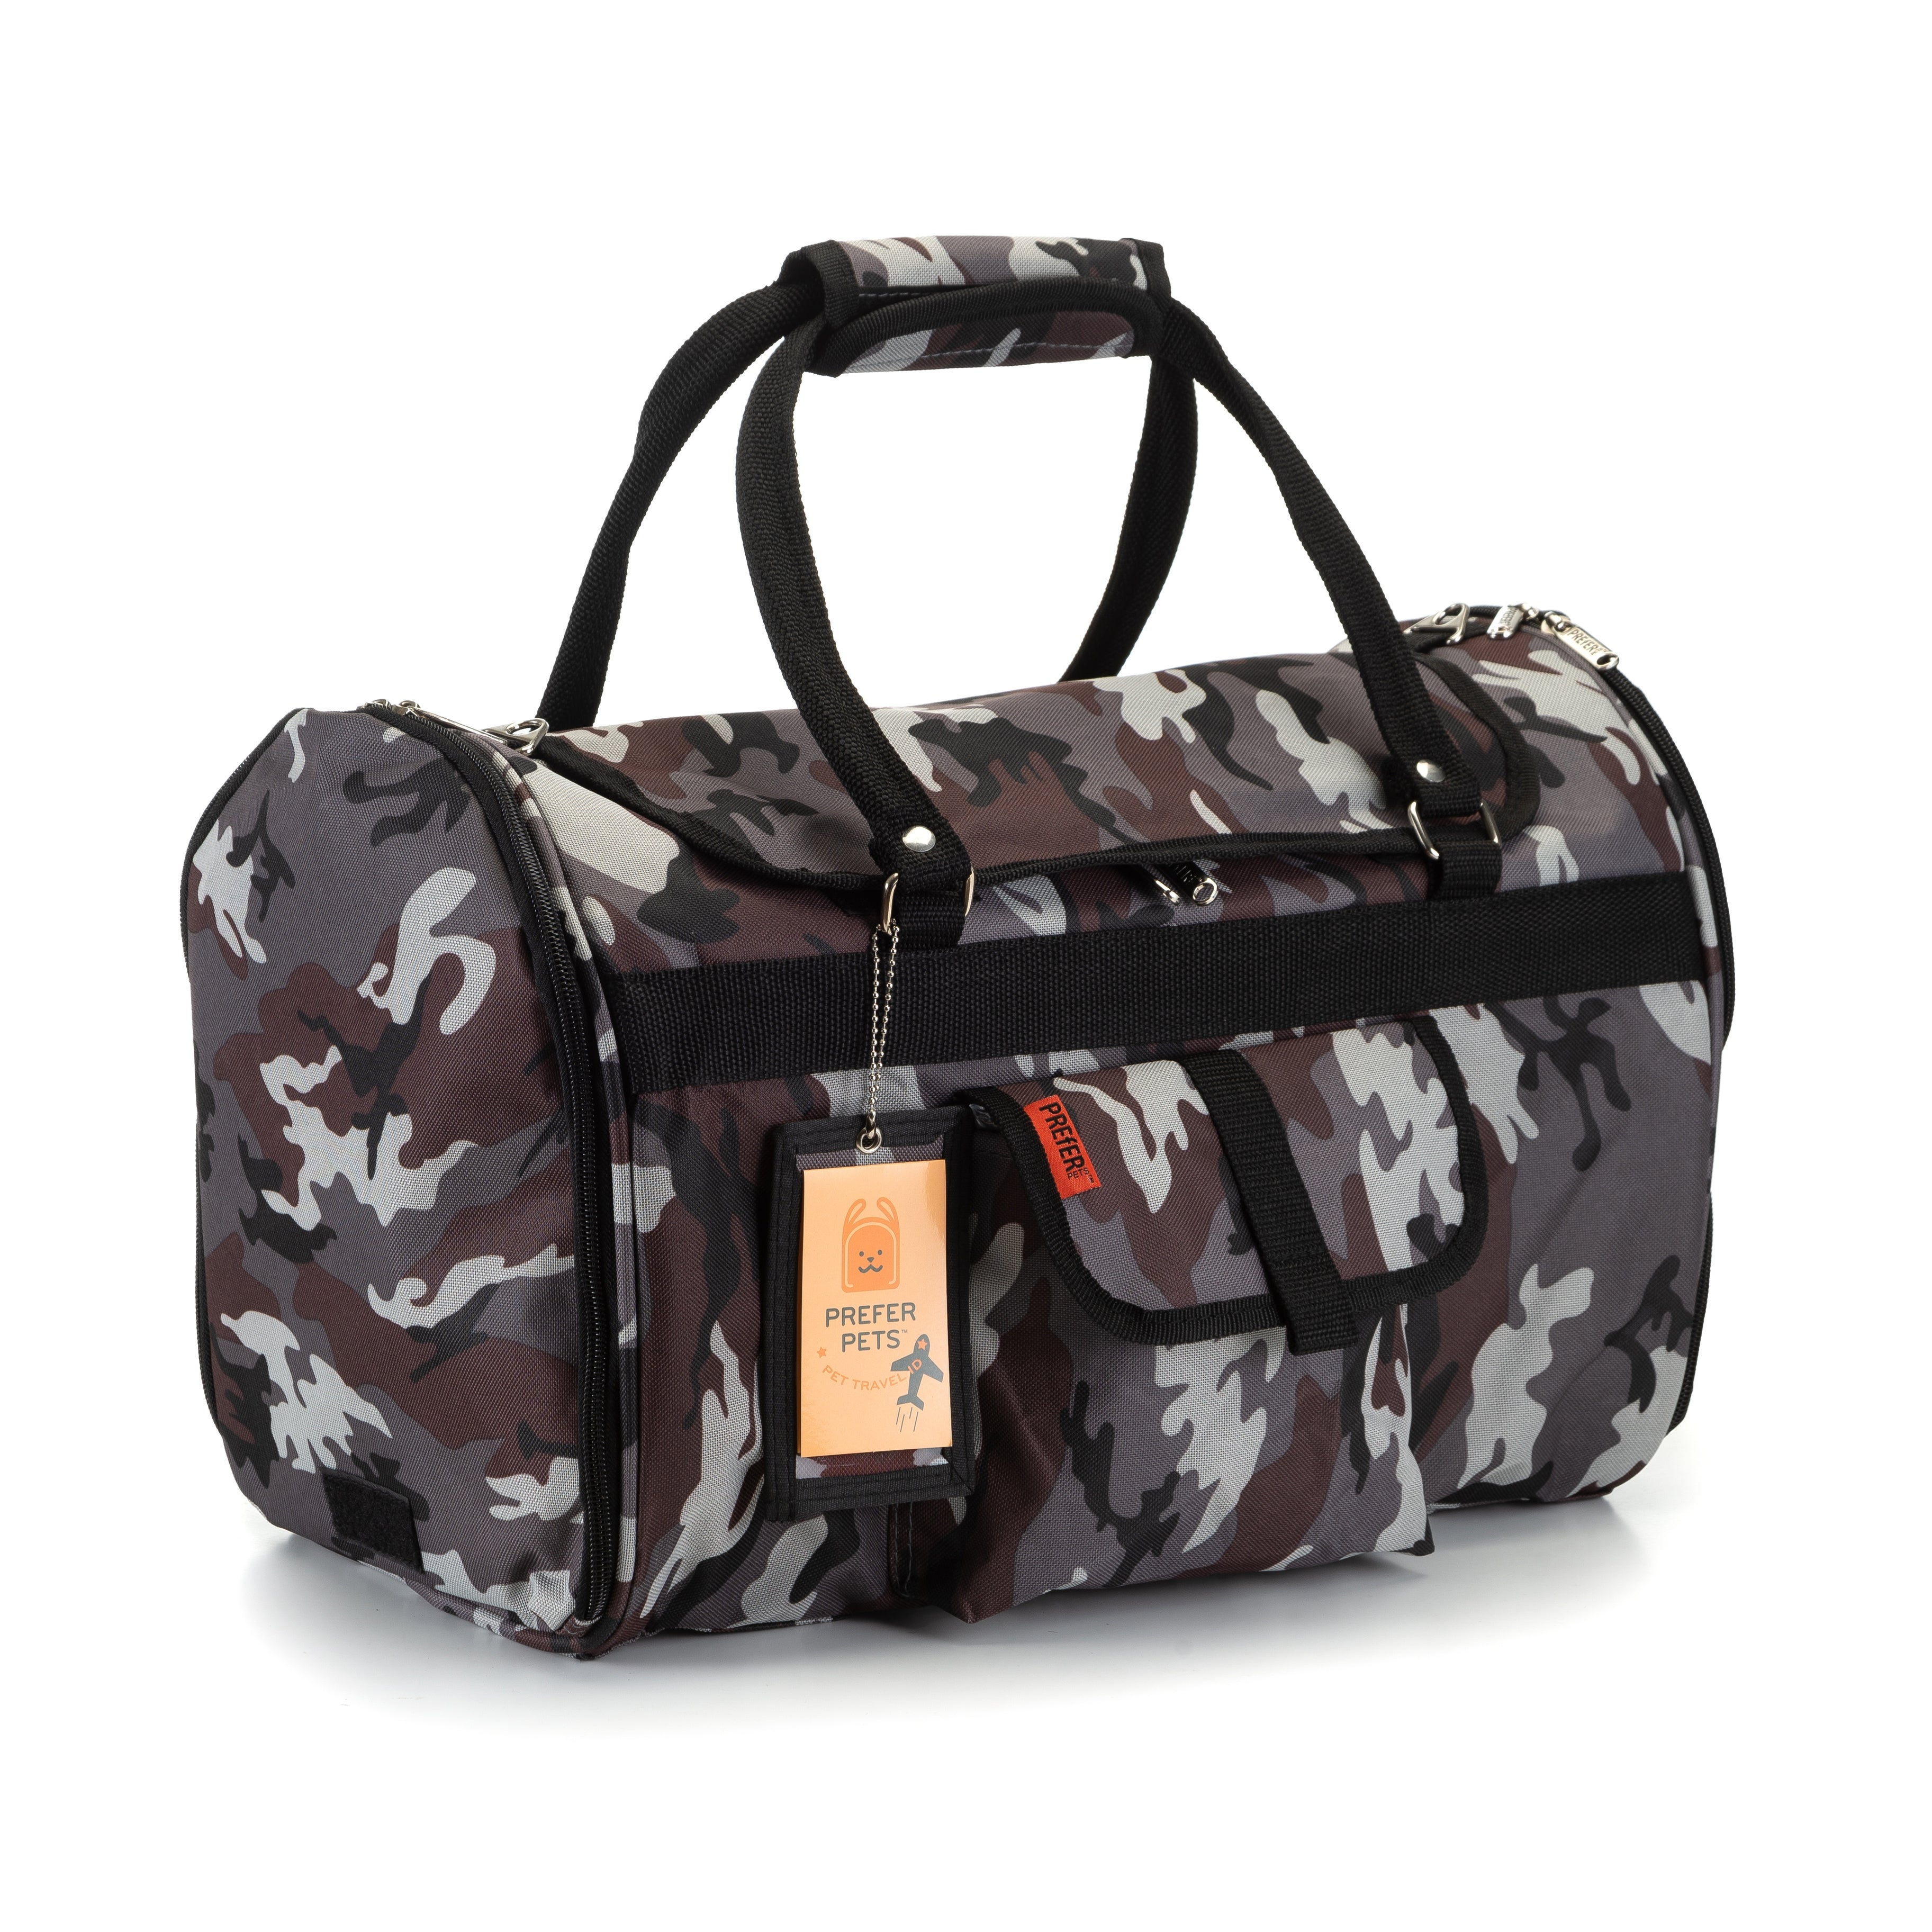 Designer Dog Carriers - Grey Camouflage Hideaway Duffel Dog Carrier by Prefer Pets